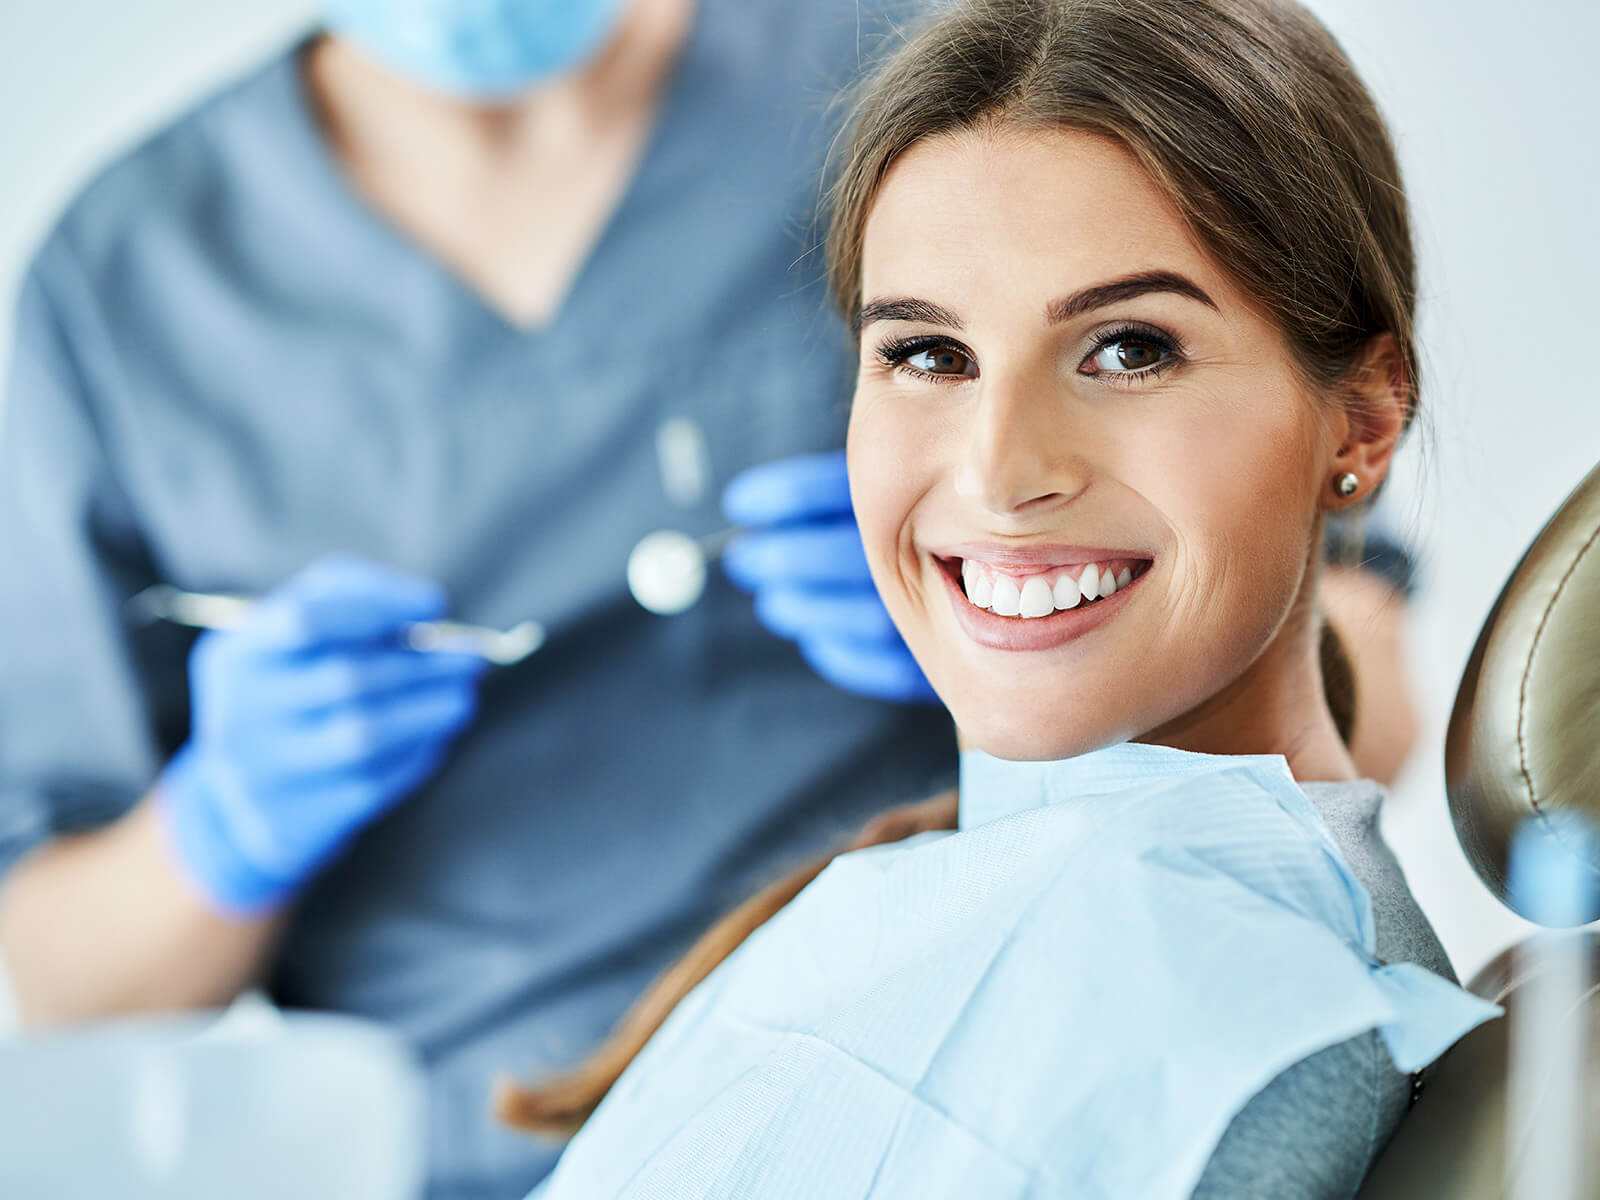 What Should You Know About Dental Bonding?